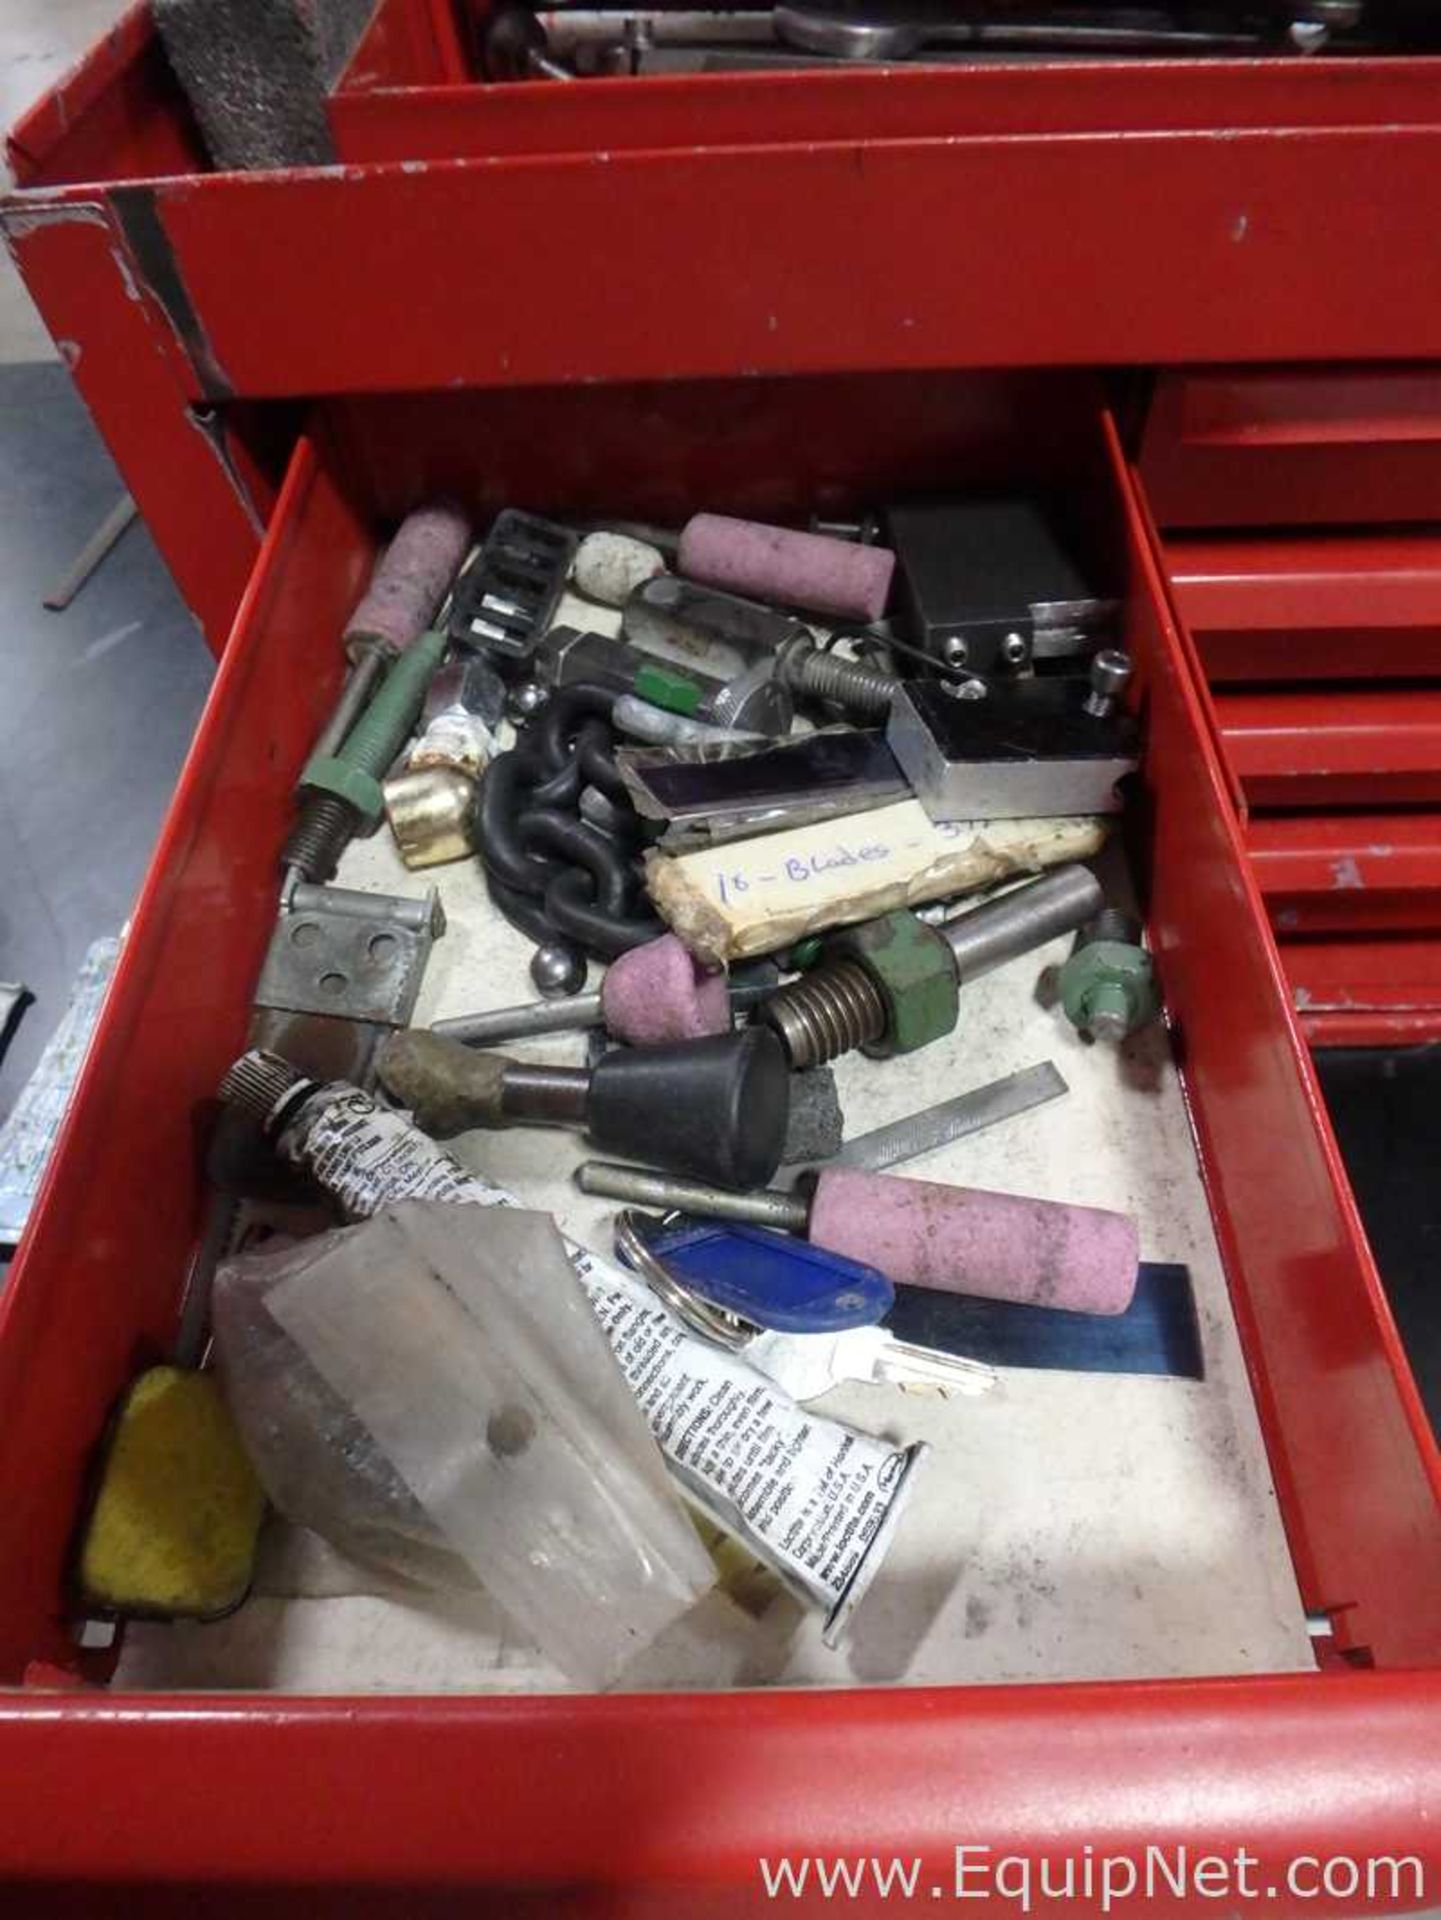 EQUIPNET LISTING #835371; REMOVAL COST: $15; DESCRIPTION: Tool Chest with Some ToolsSee Photos - Image 7 of 8